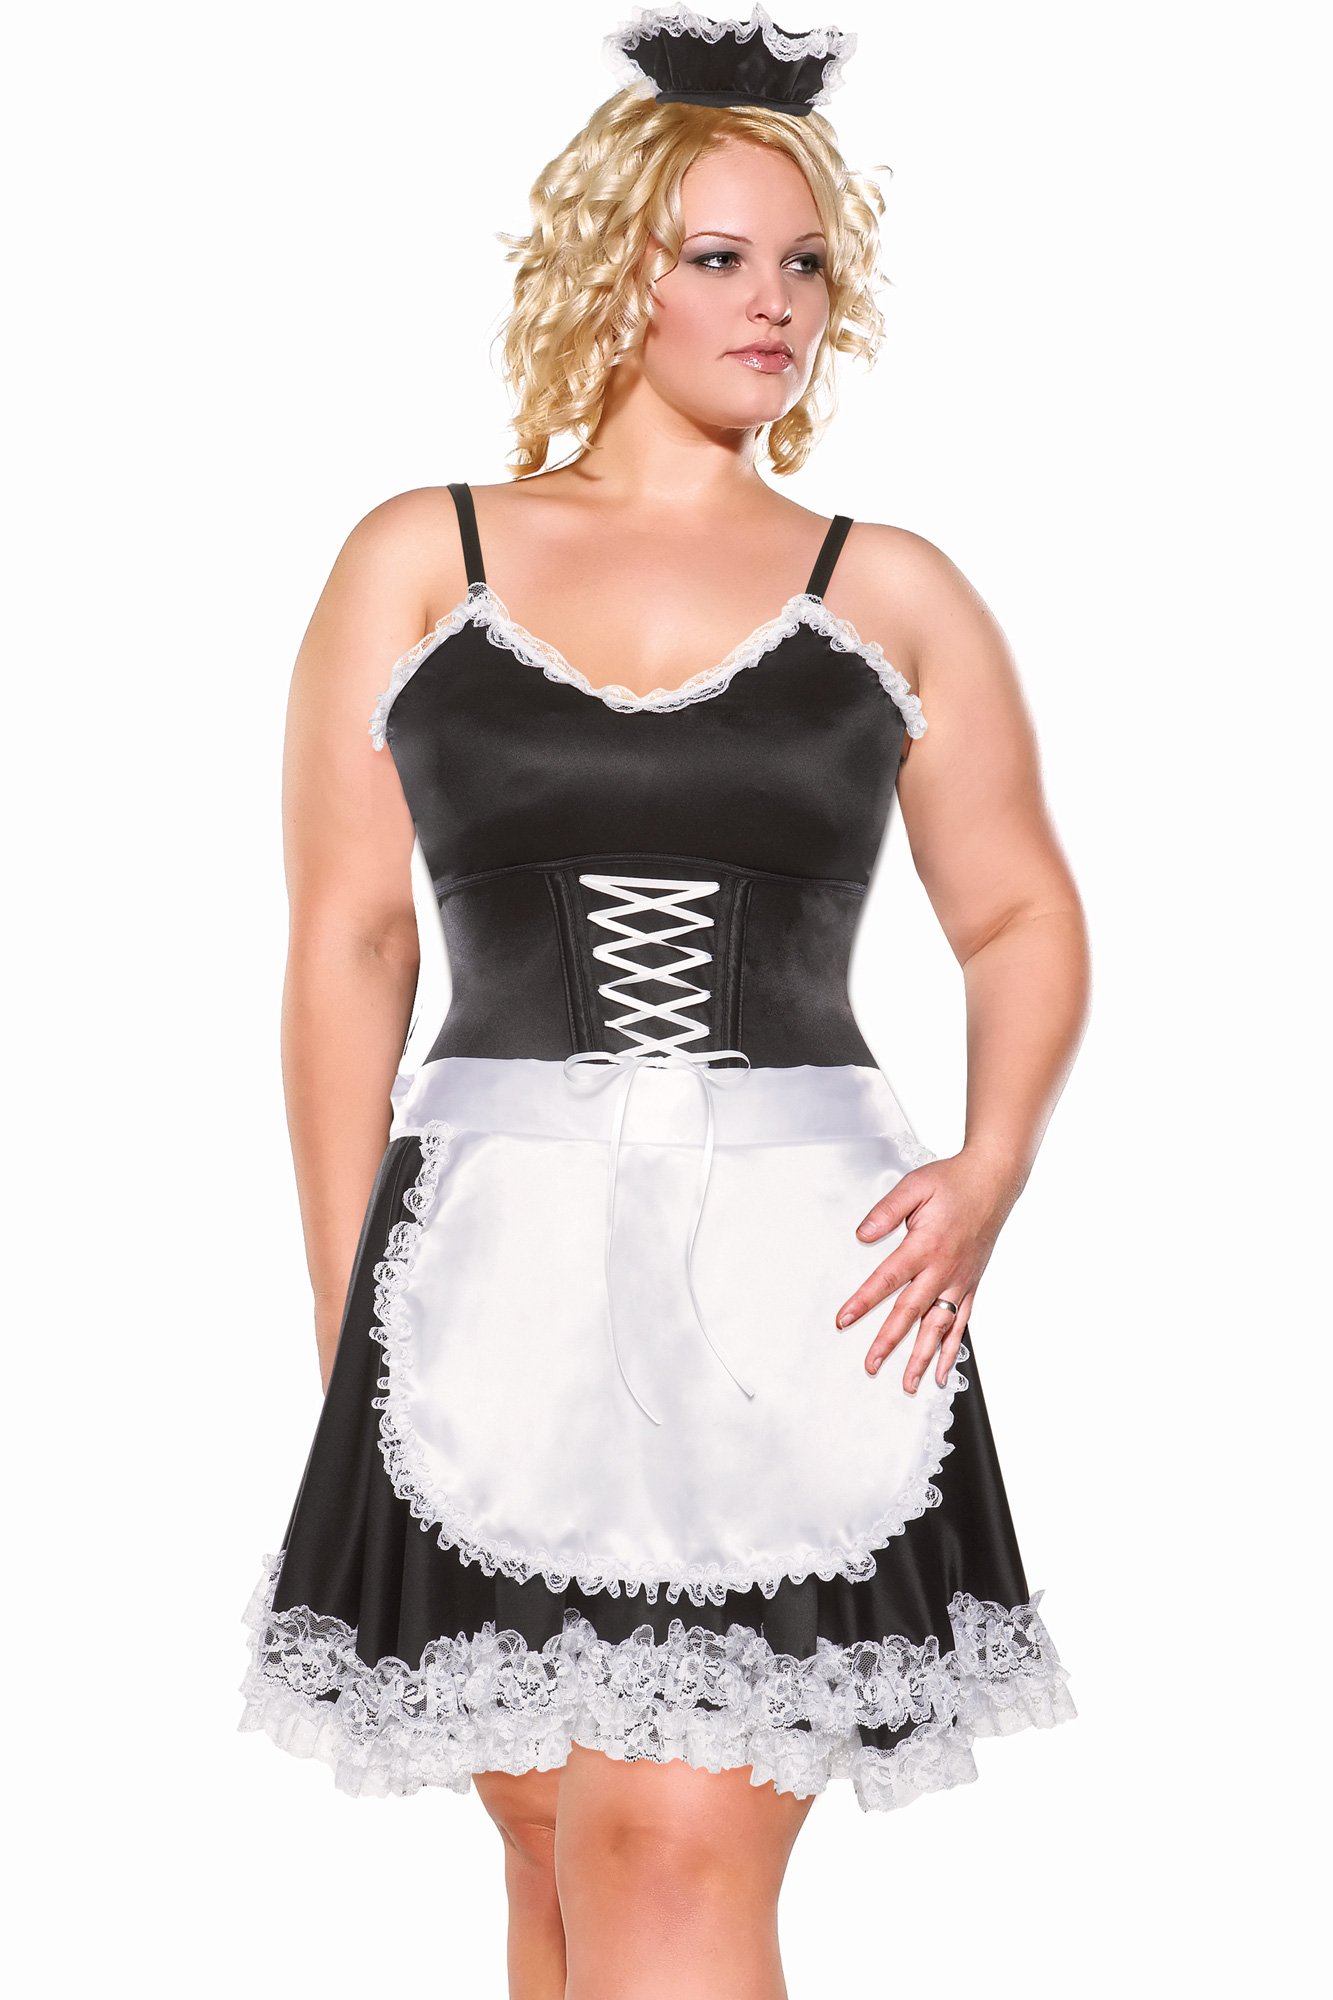 Diva Frisky French Maid Sexy Plus Adult Costume